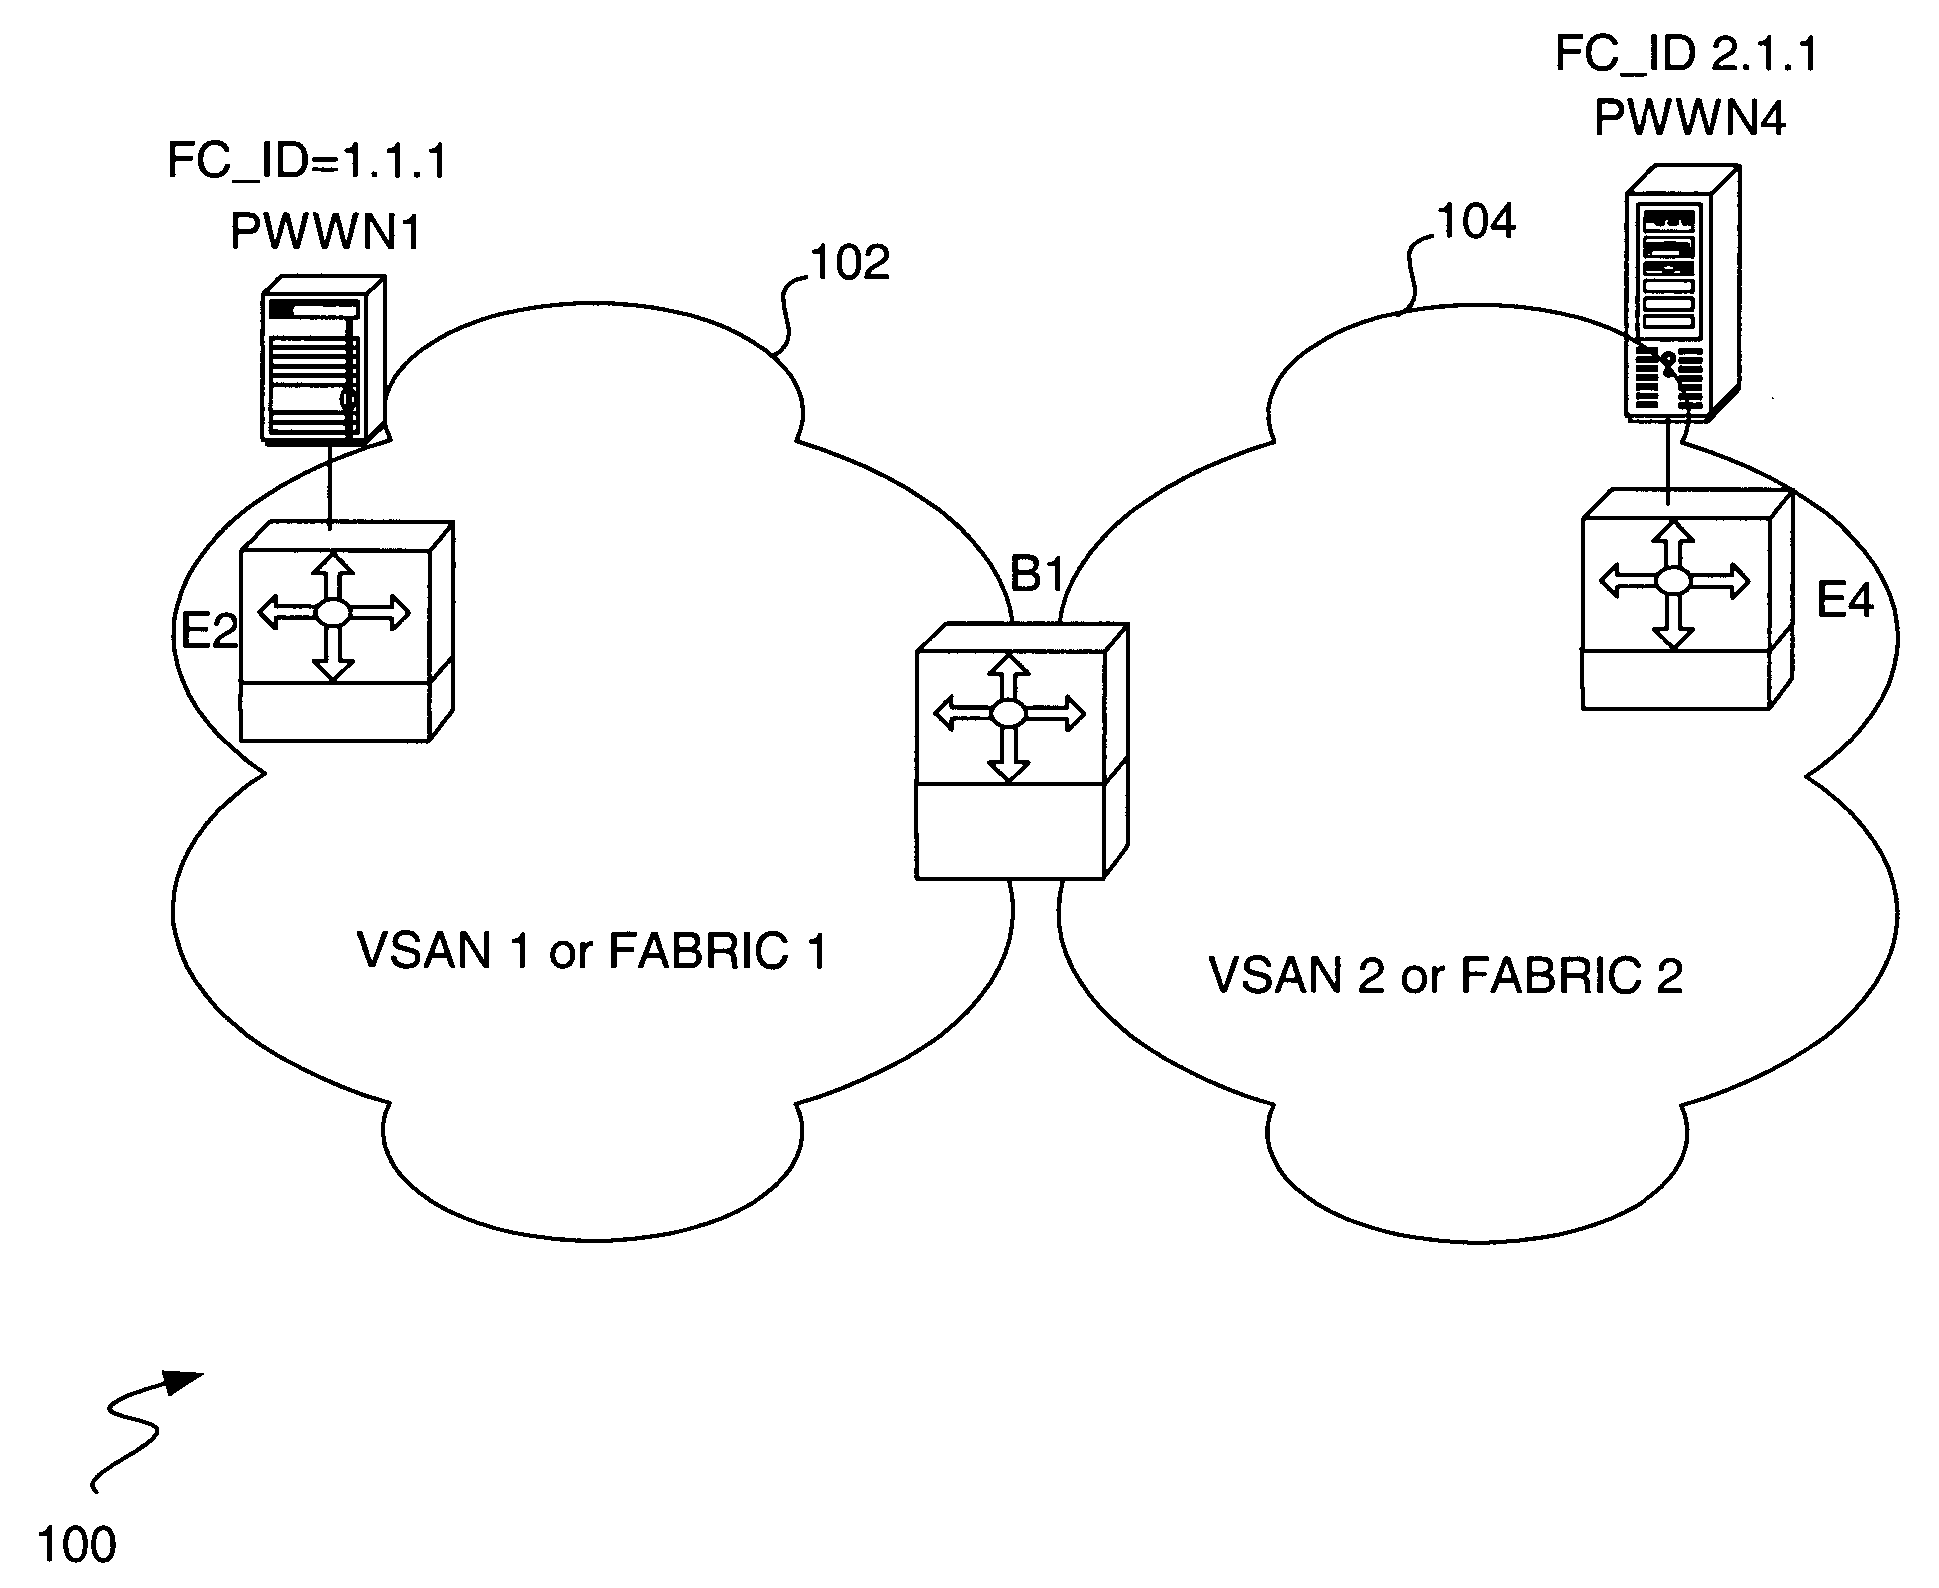 Fibre Channel Switch that enables end devices in different fabrics to communicate with one another while retaining their unique Fibre Channel Domain_IDs